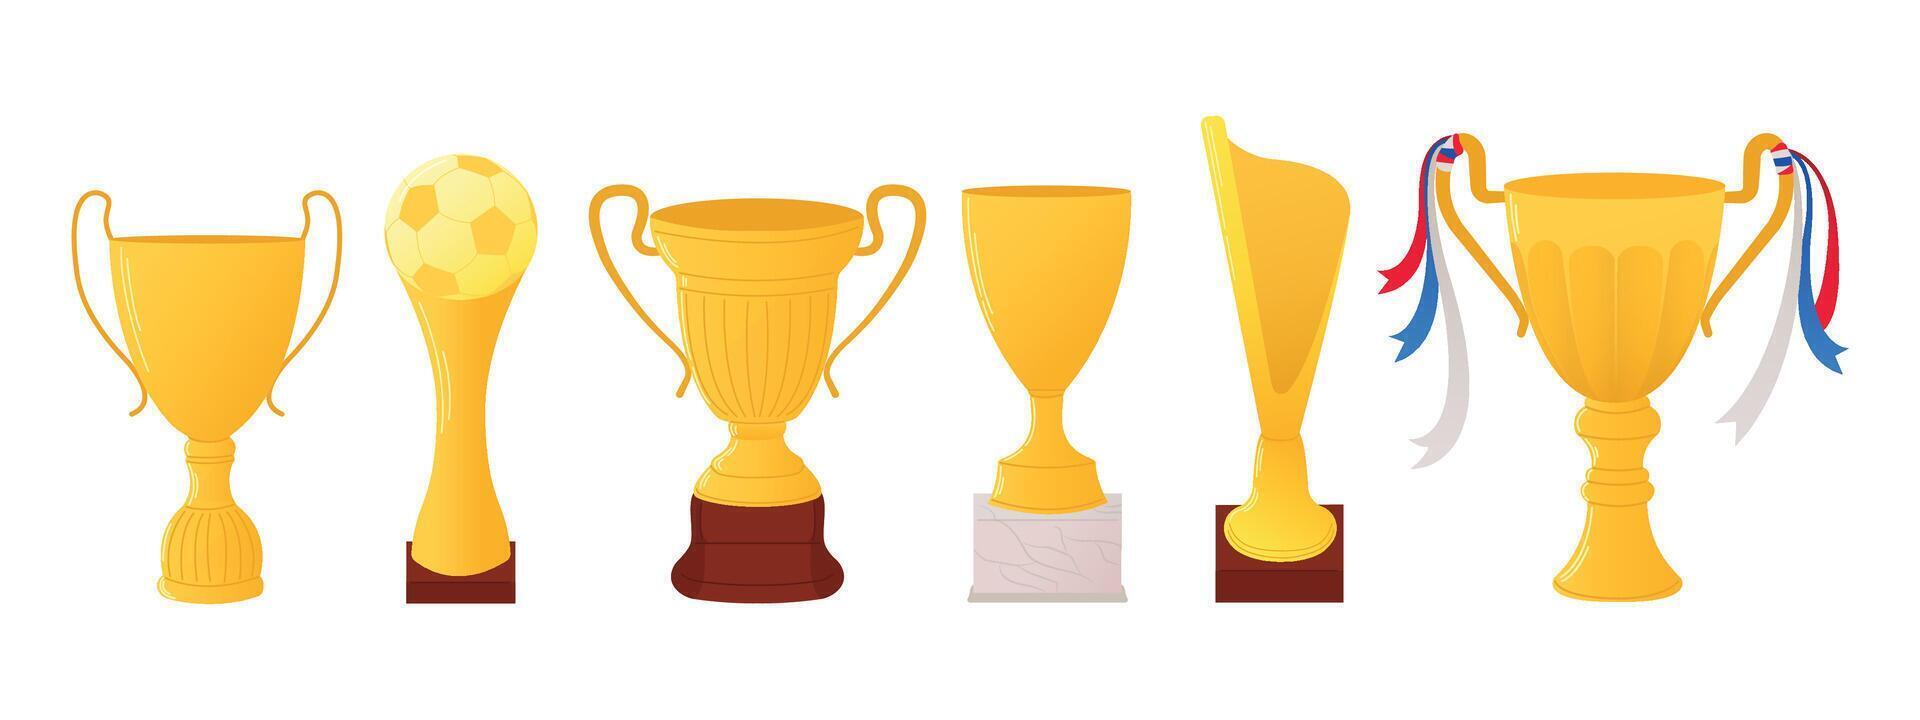 Set of winners trophy icons isolated on white background. Golden trophy as symbol of victory in sports event. illustration for poster, icon, card, logo, banner or sticker. vector